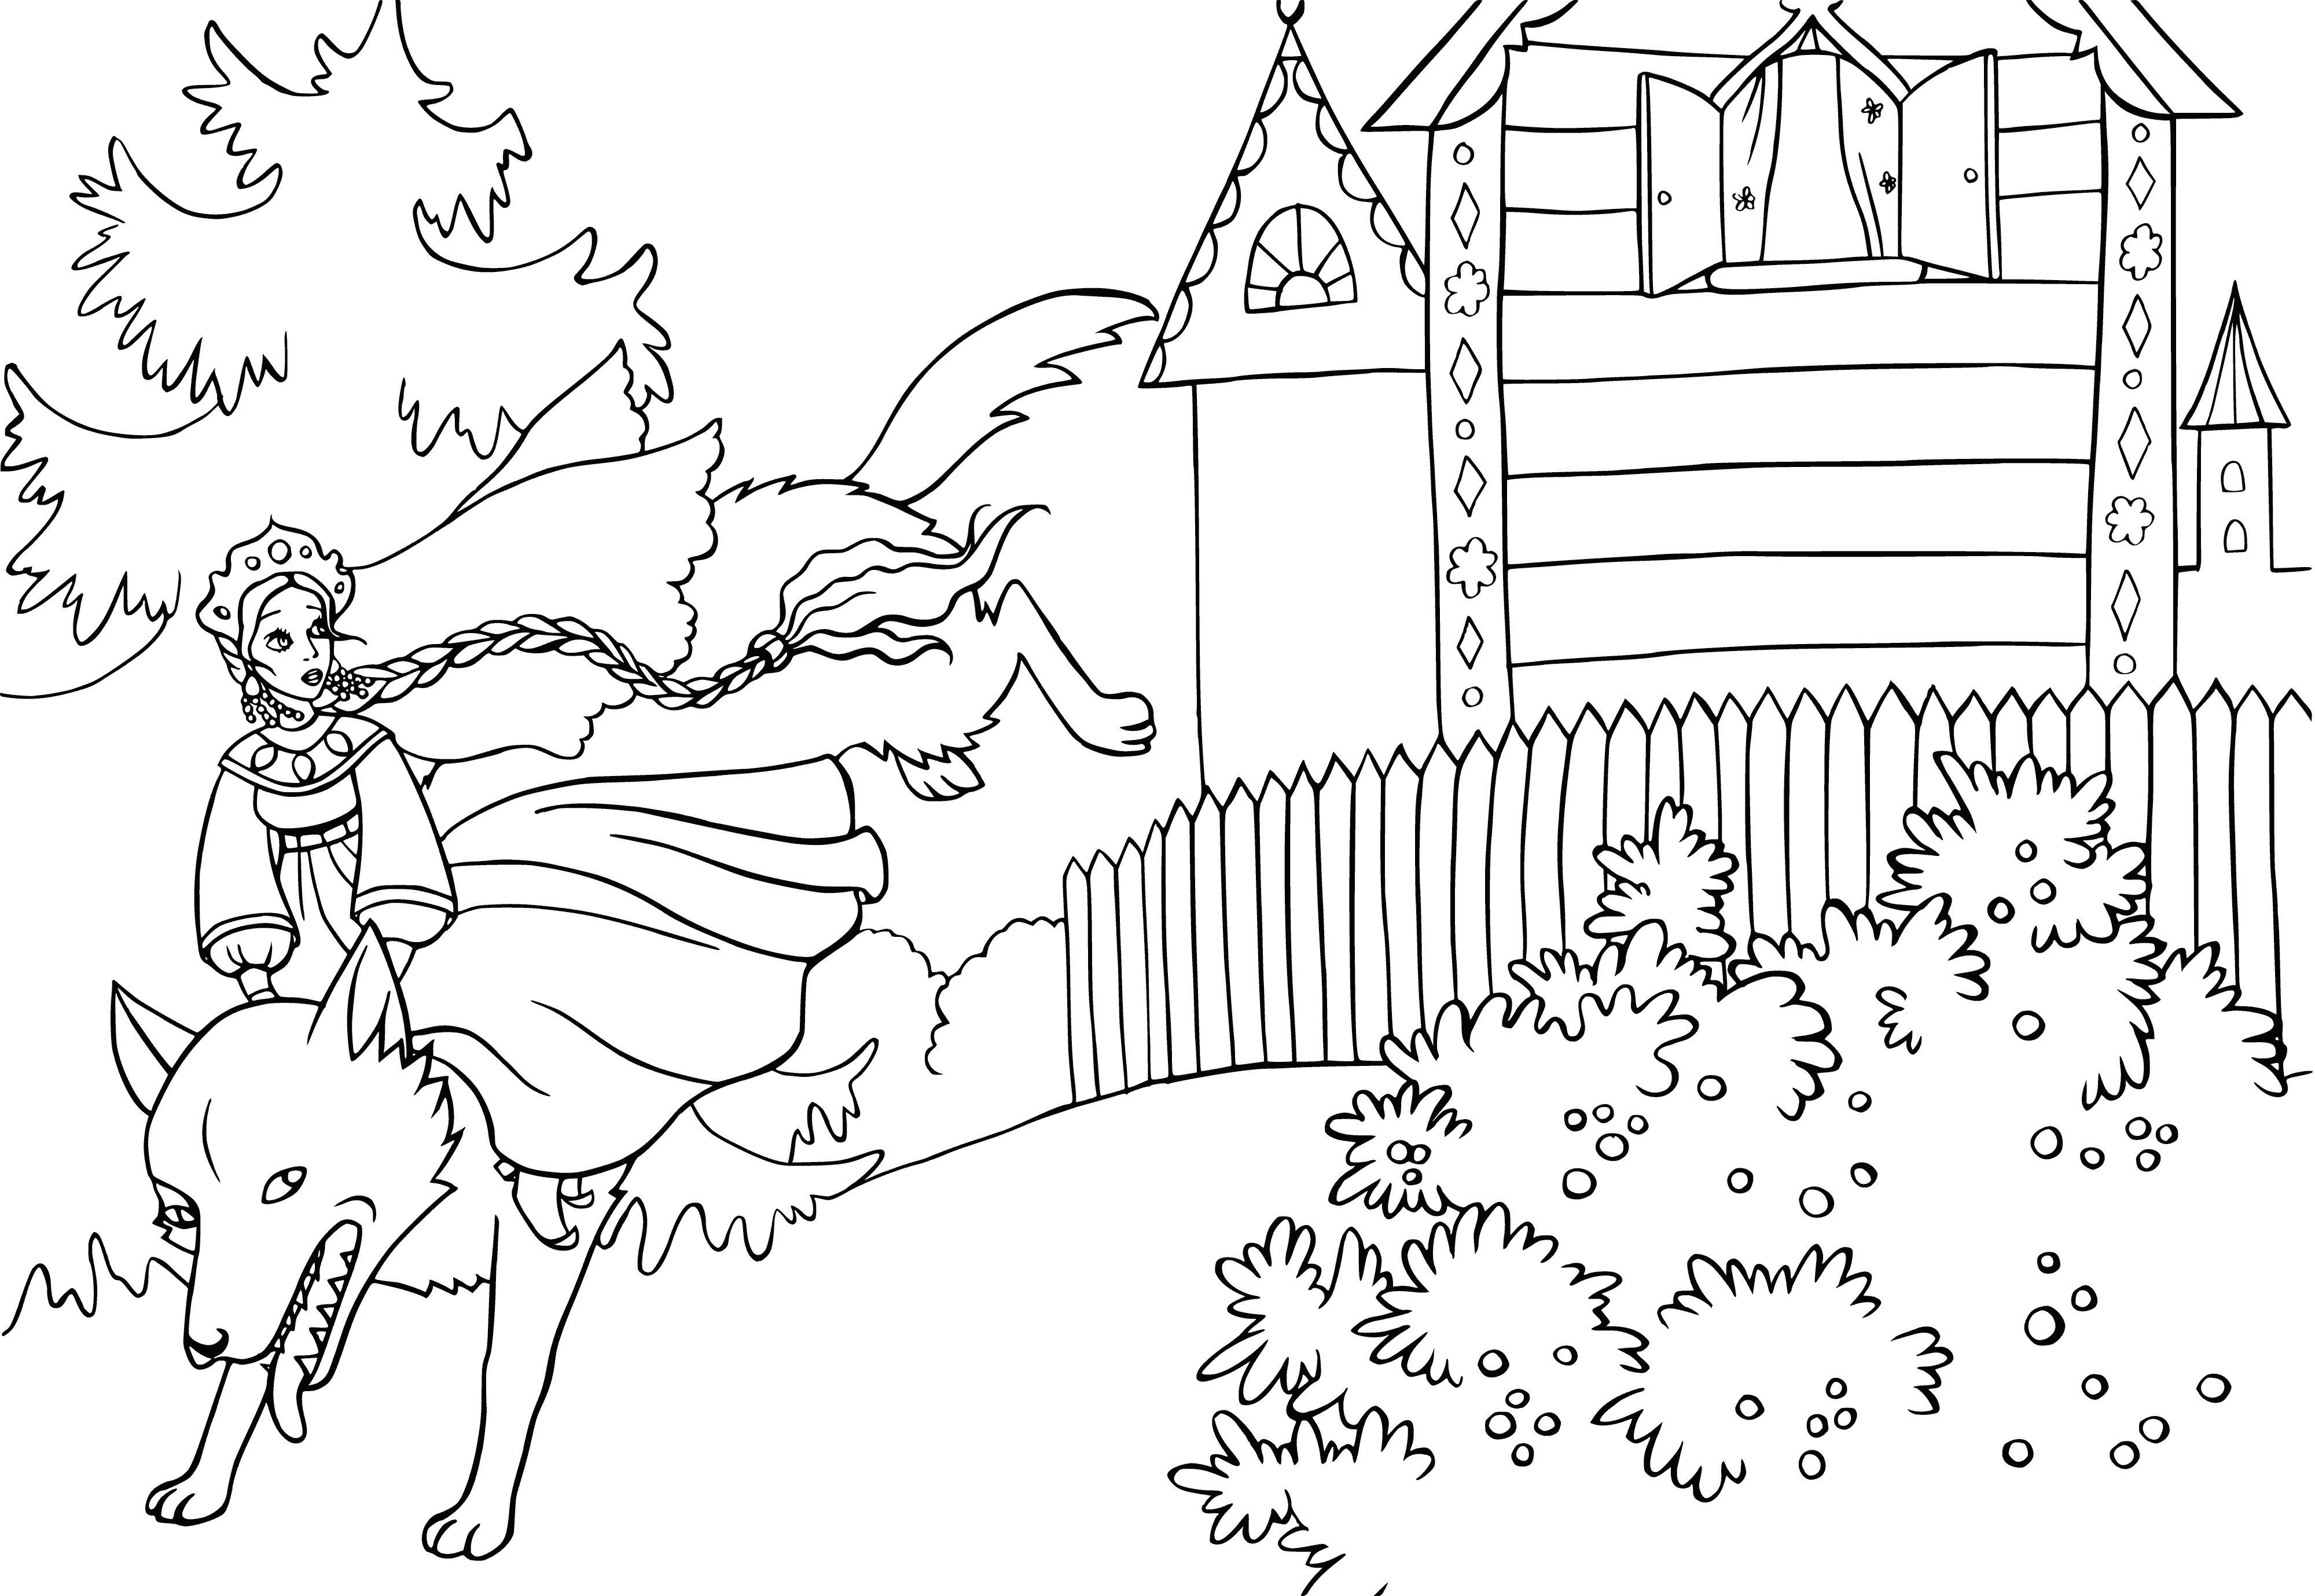 On a gray wolf coloring page